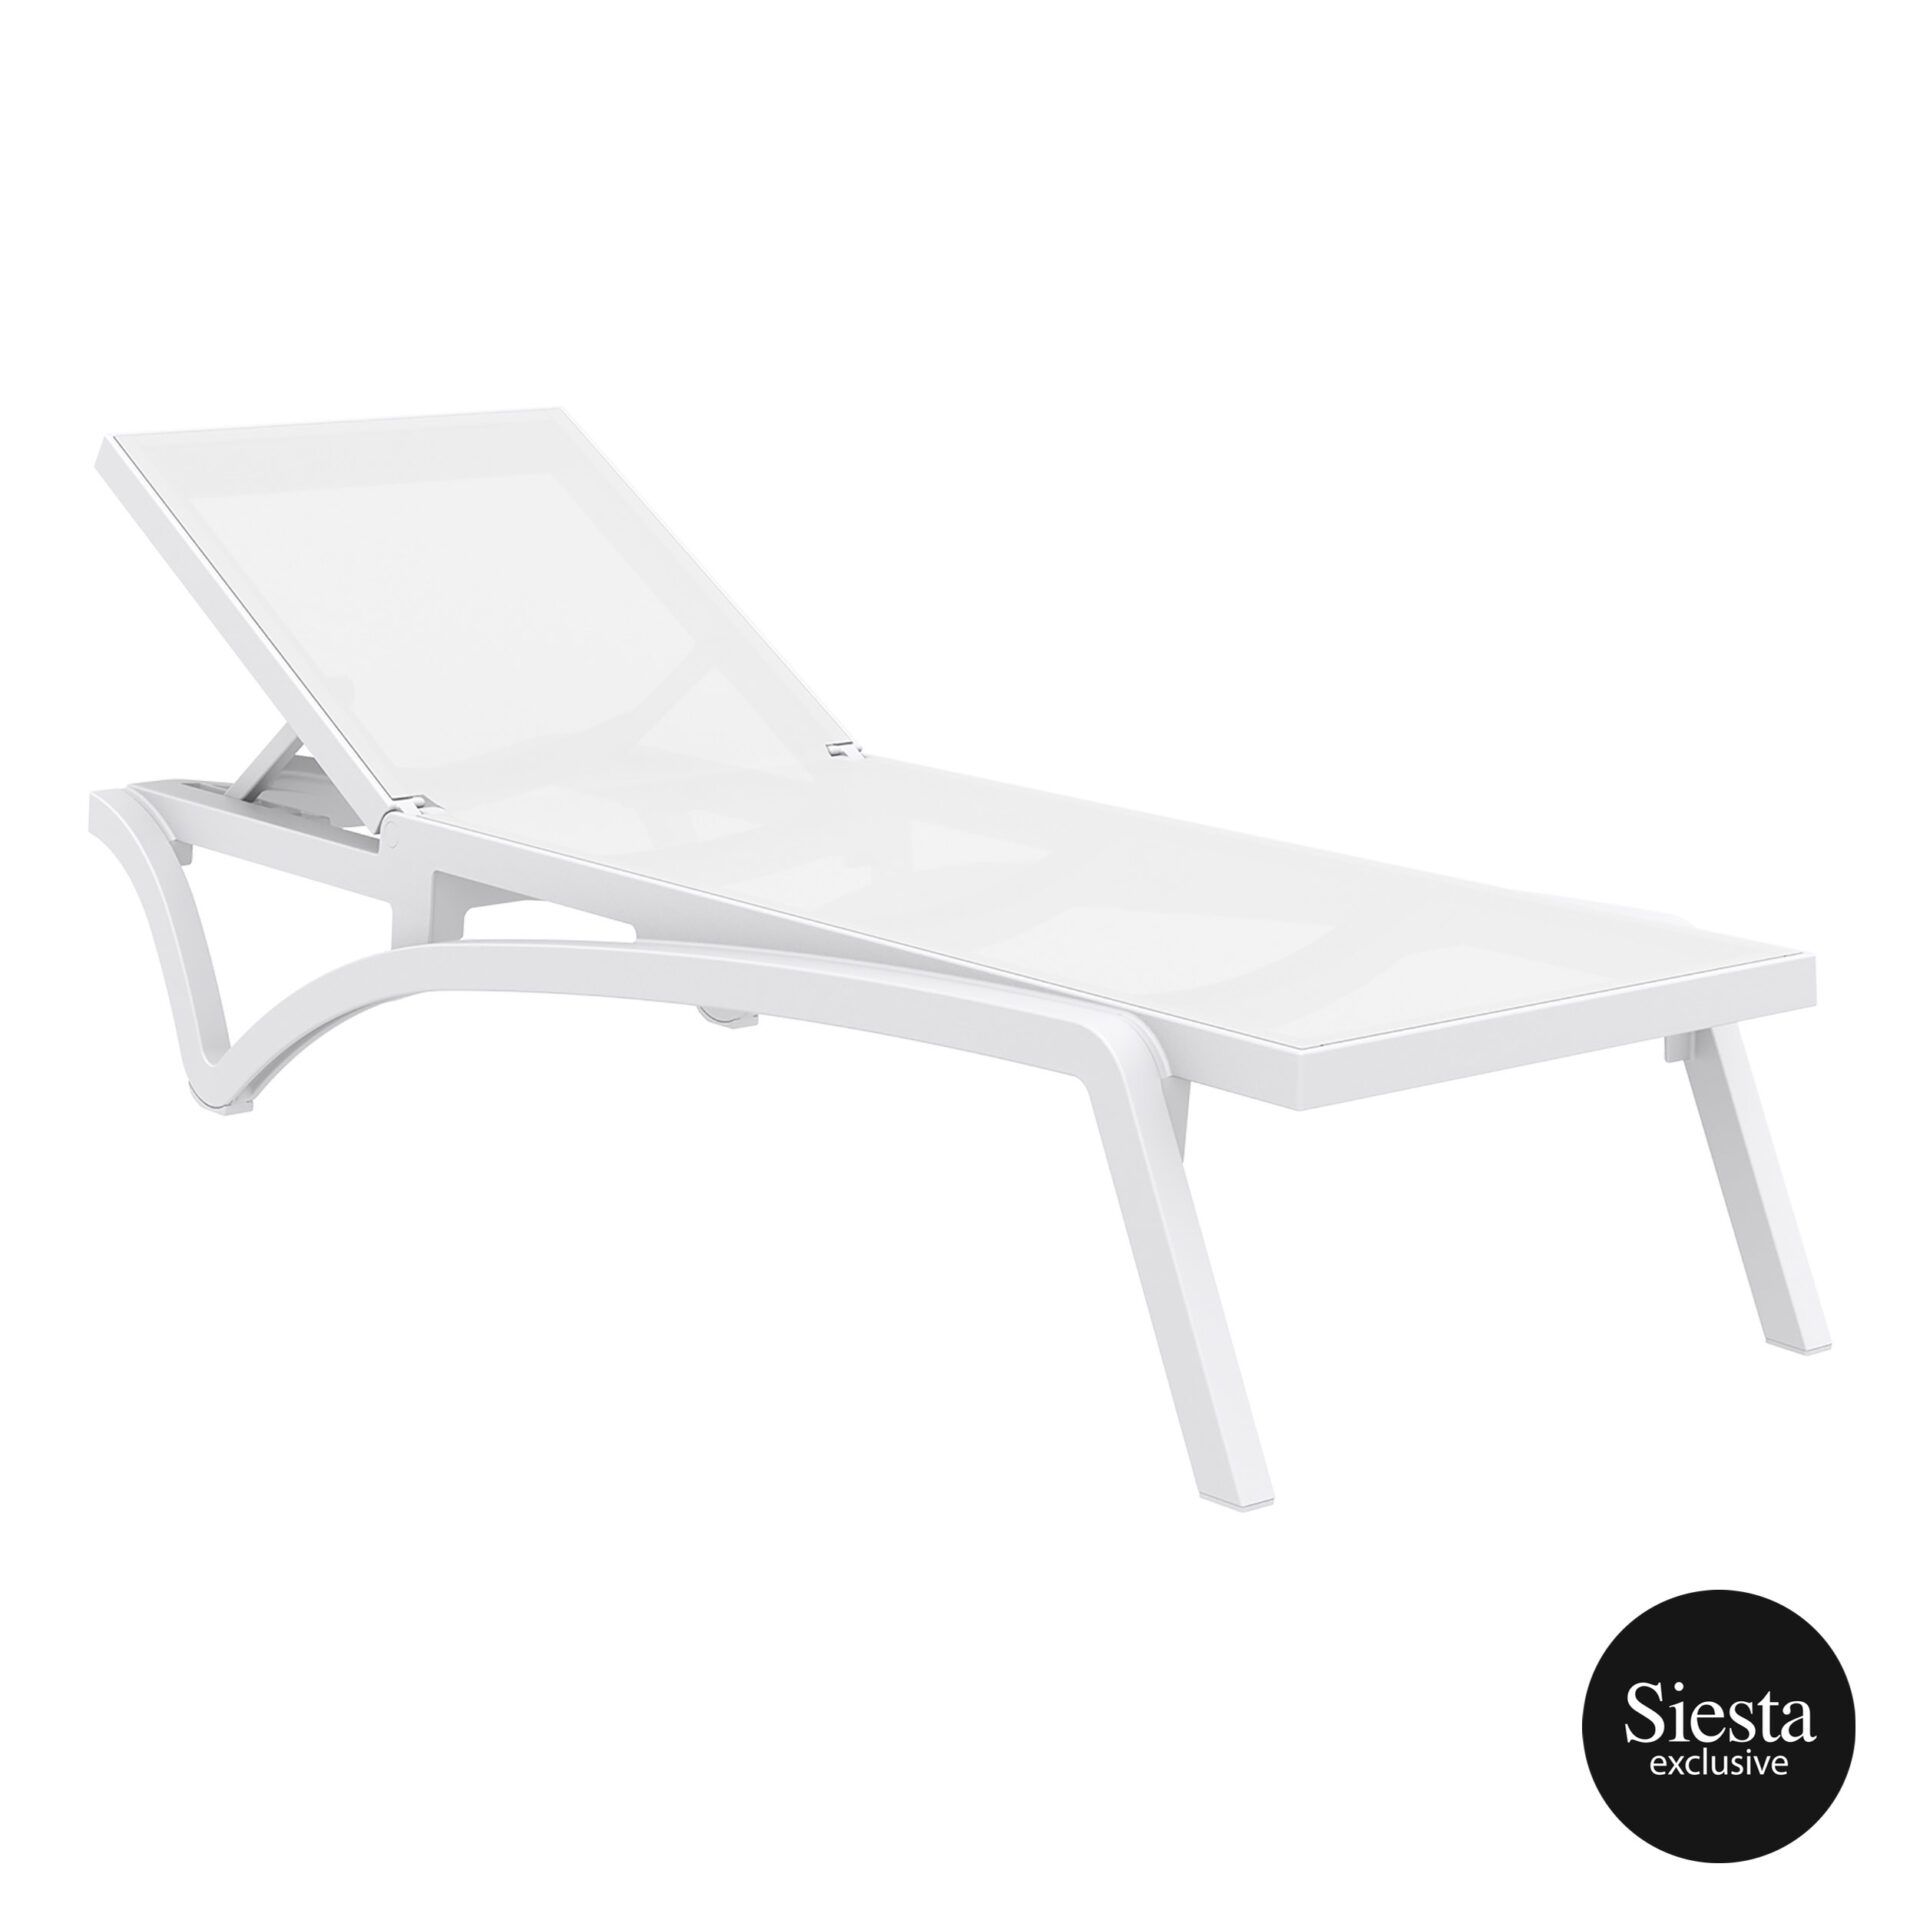 Pacific Sunlounger - White/White